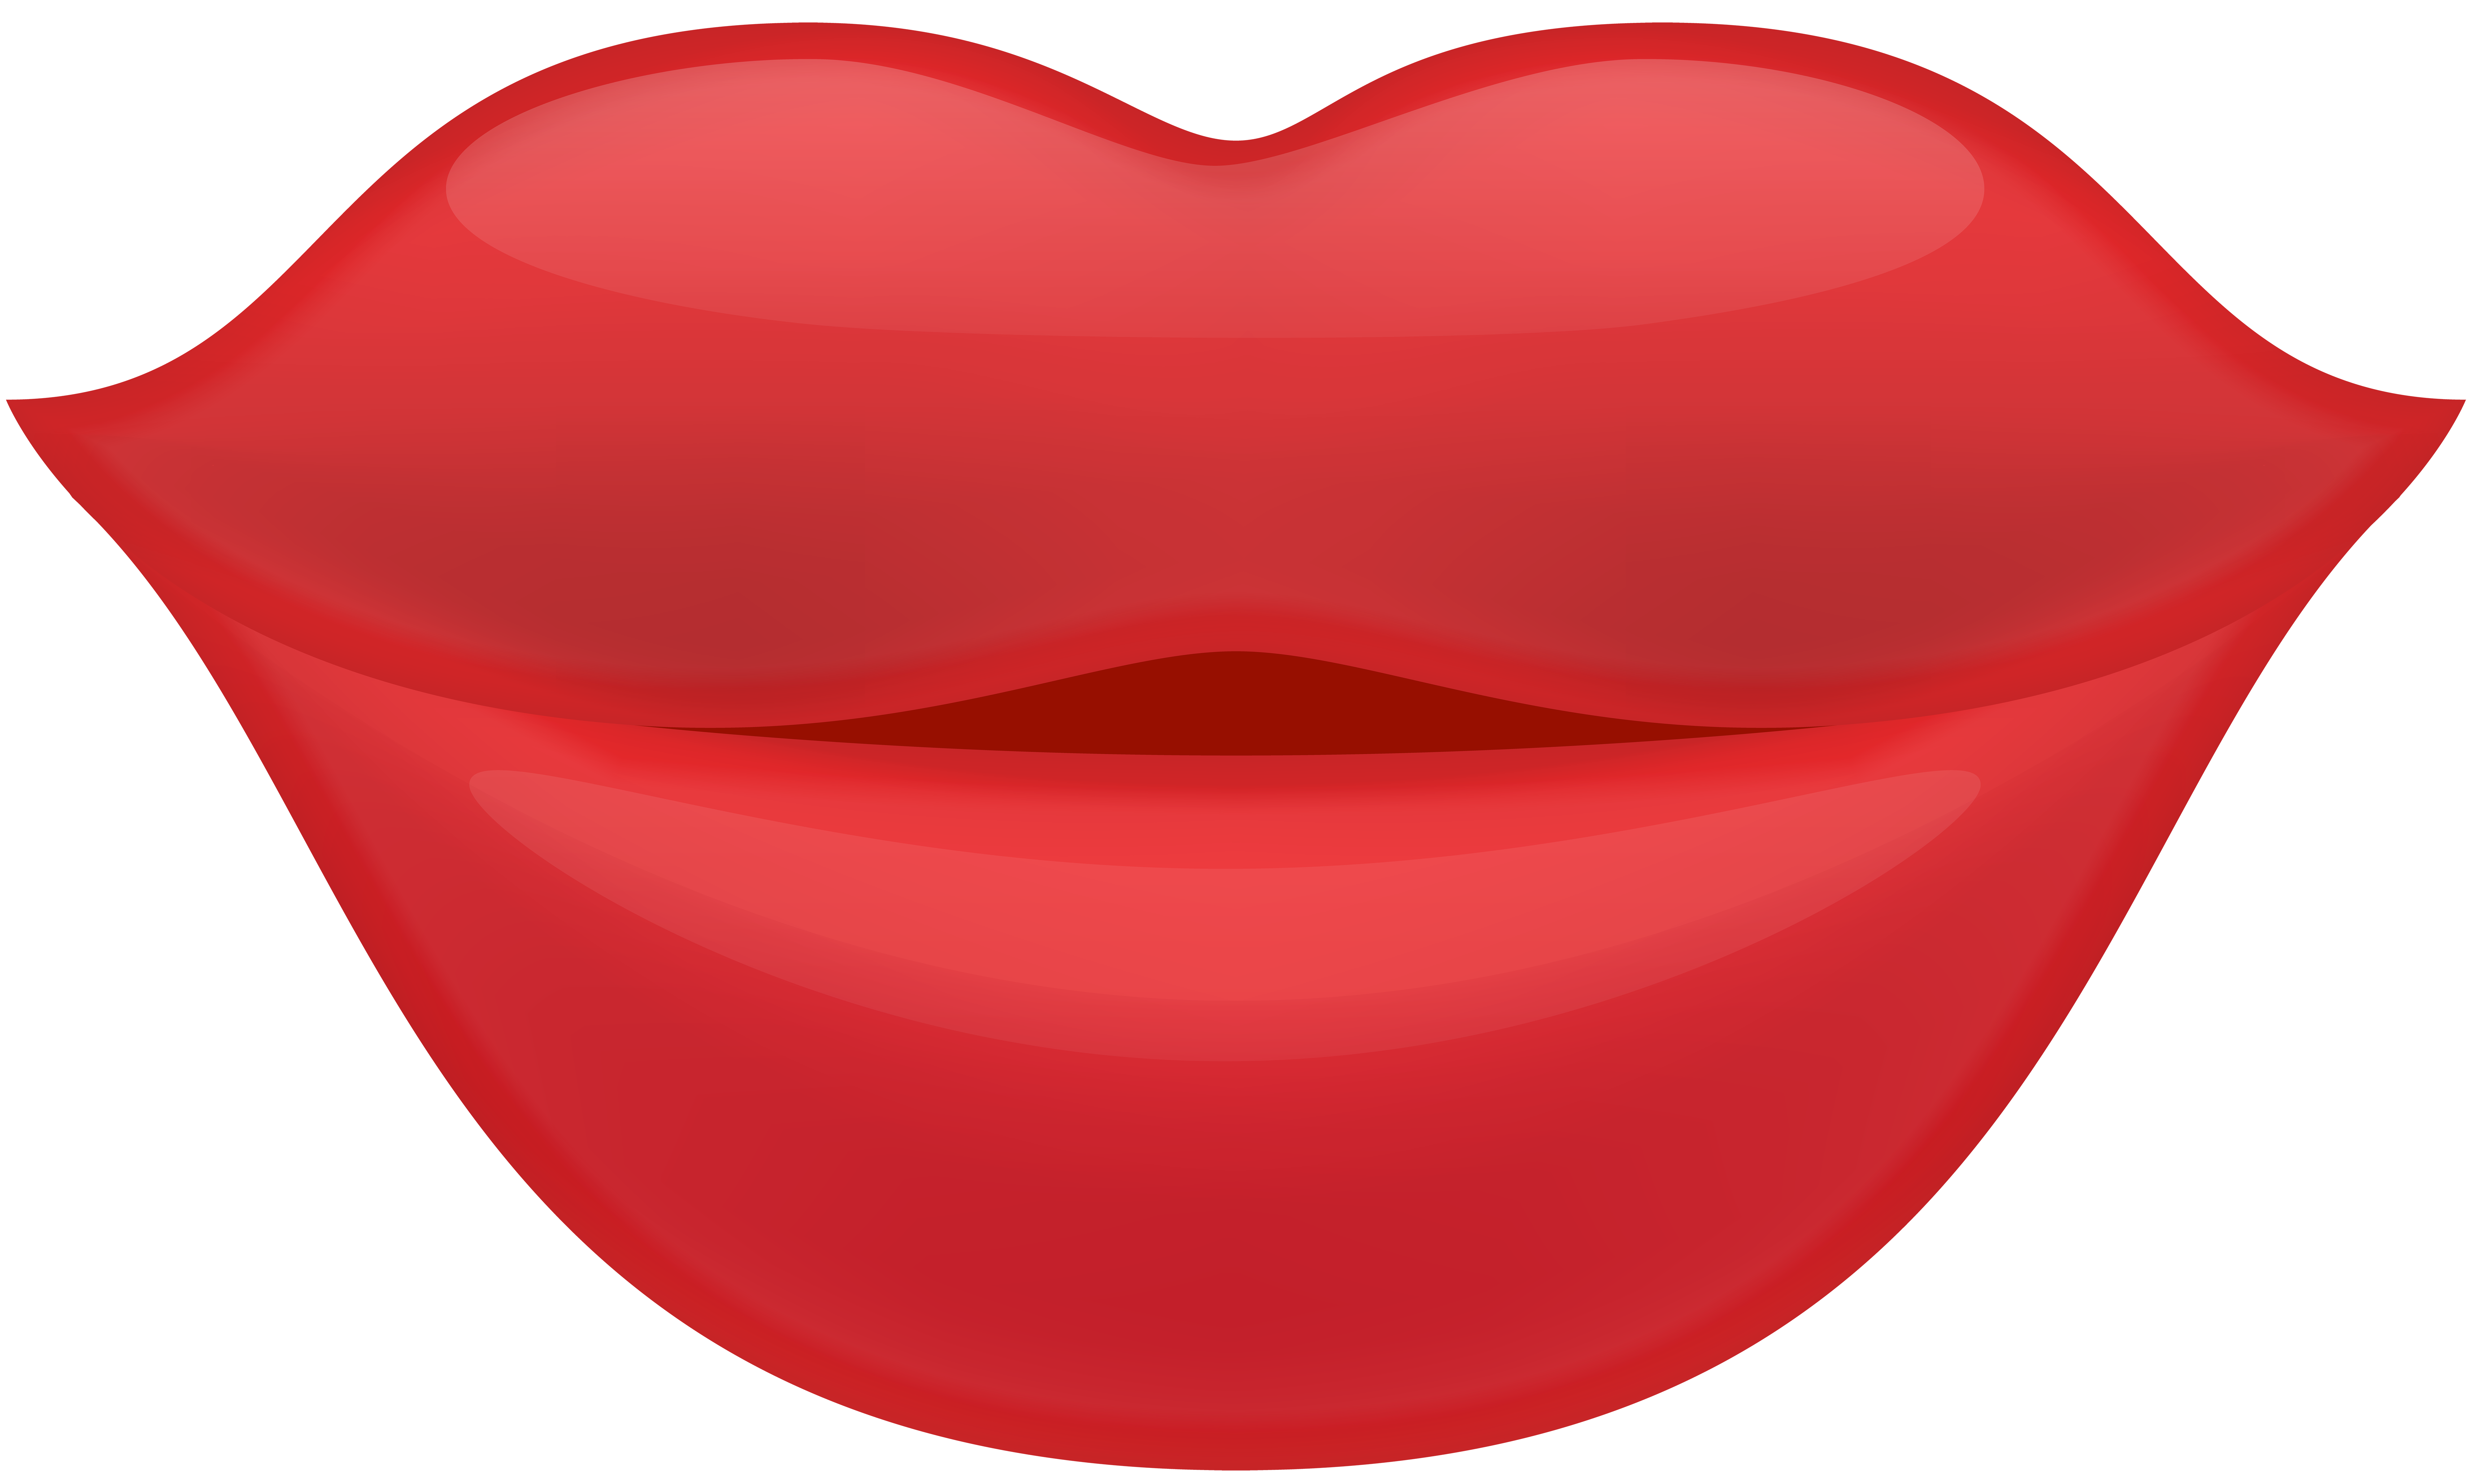 Lips Png This Png Image Was Uploaded On January 6 2017 1220 Pm By